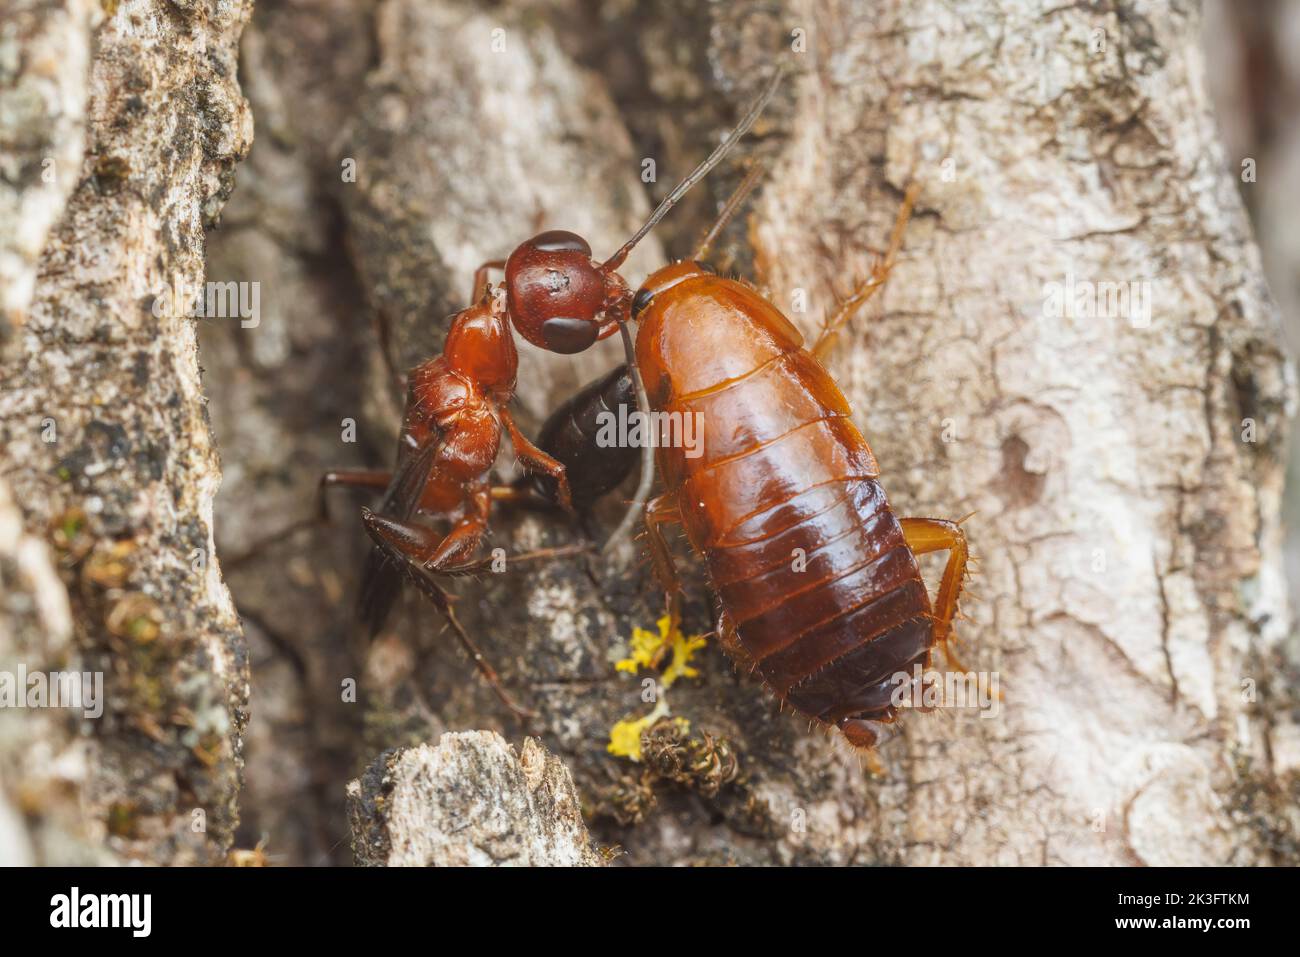 A Cockroach Wasp (Ampulex ferruginea) stings and subdues a Wood Cockroach (Parcoblatta sp.) Stock Photo